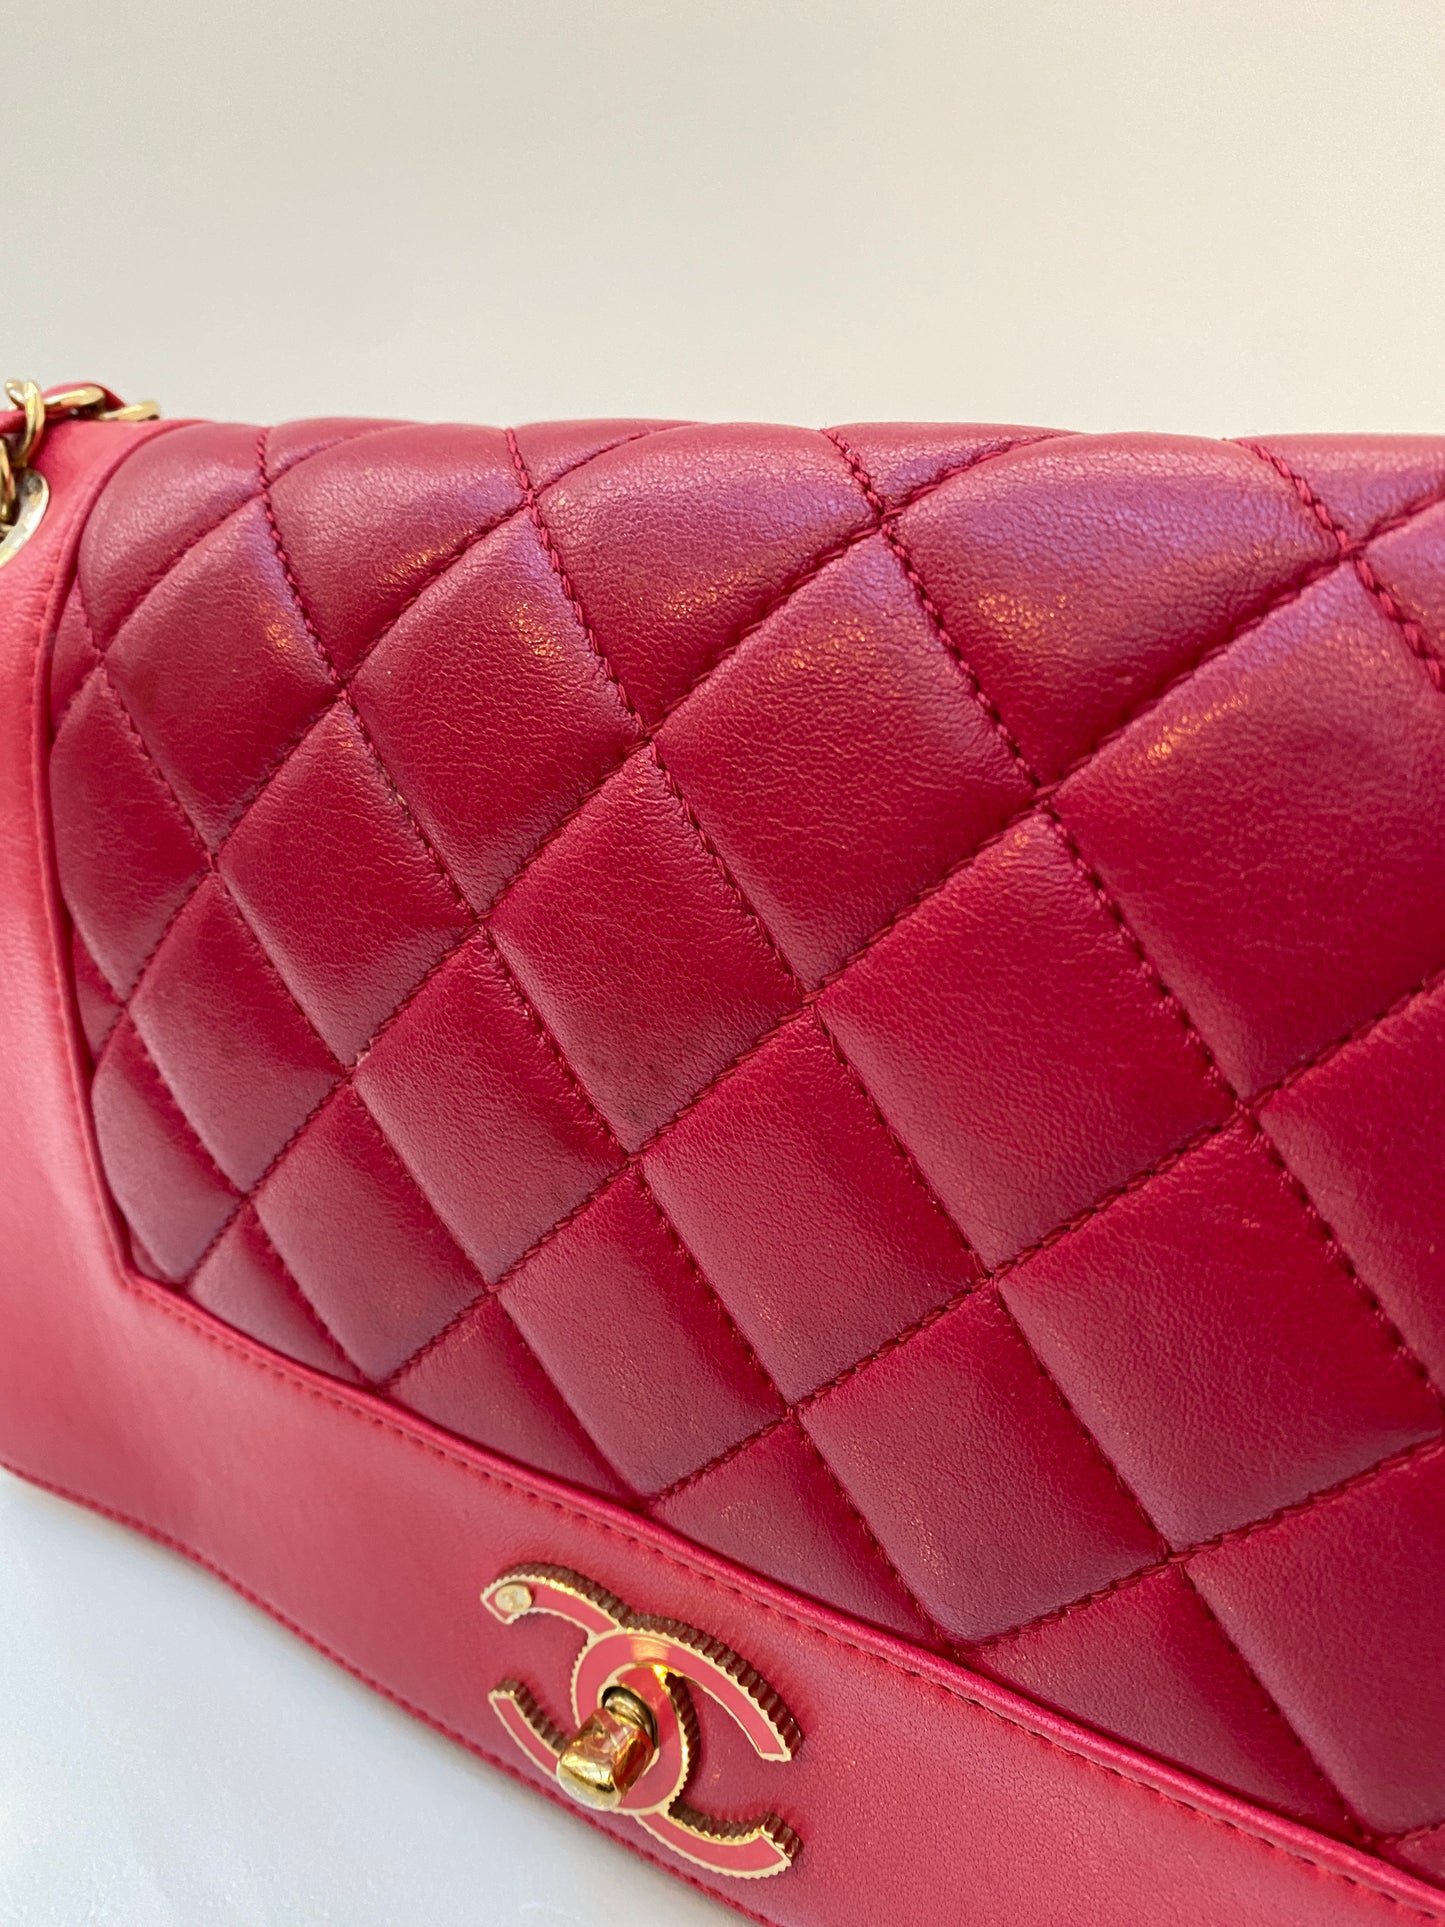 Chanel Hot Pink Lambskin Leather Mademoiselle Flap Bag GHW